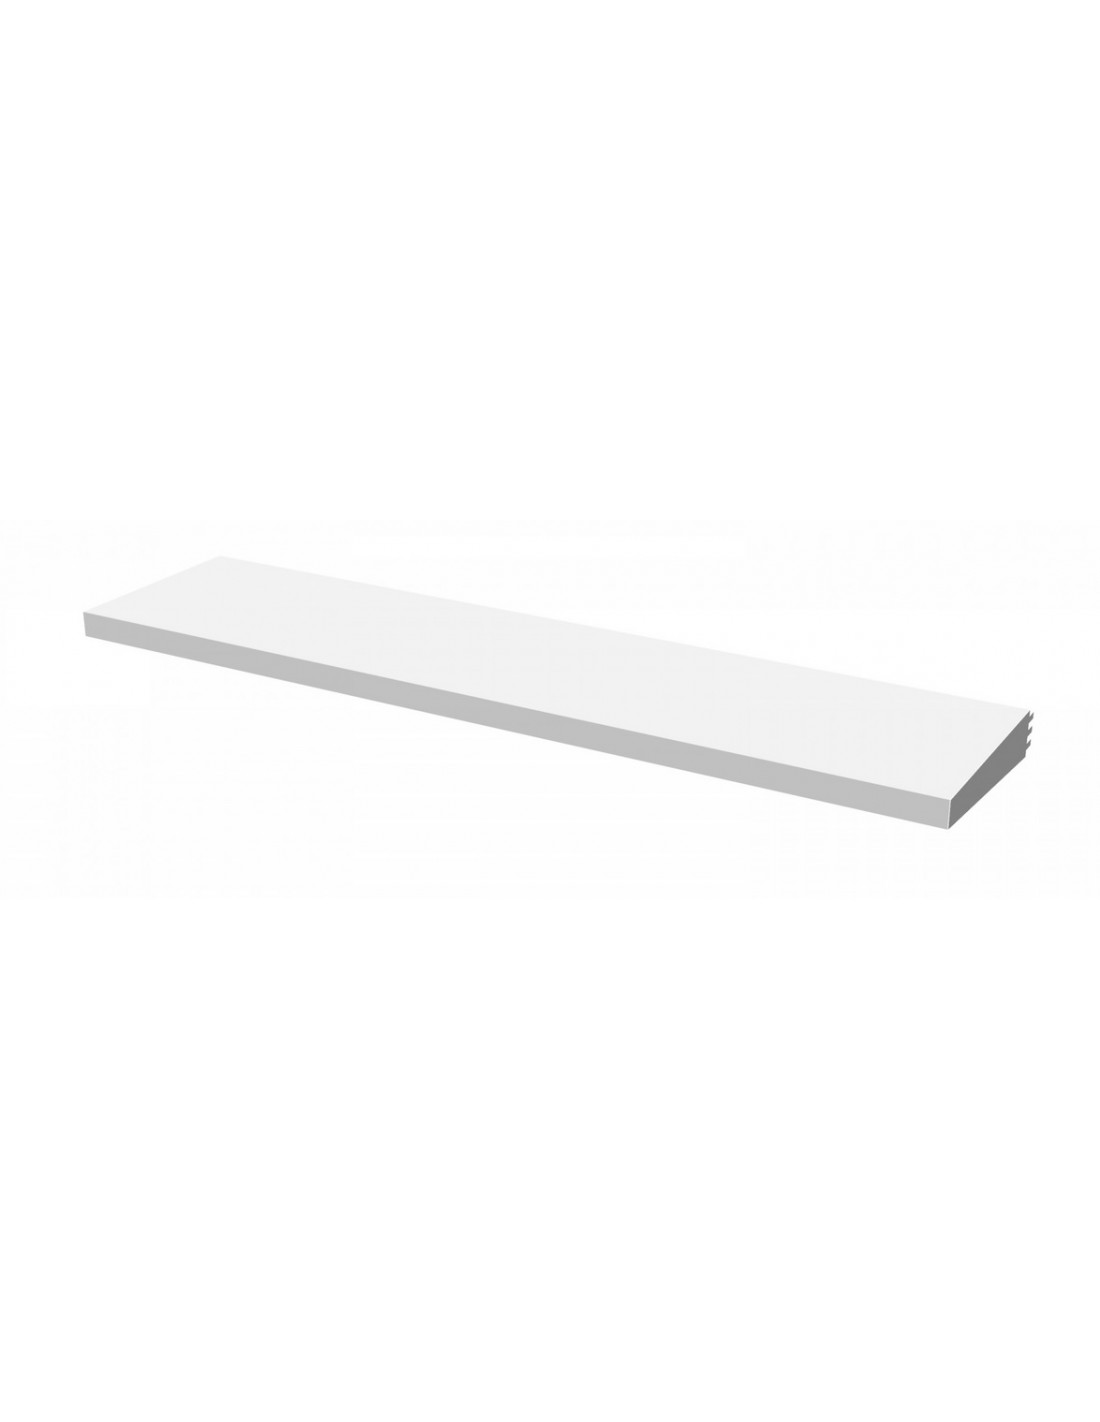 Additional shelf in 100 cm white painted sheet - For mod. VOLCANO 60